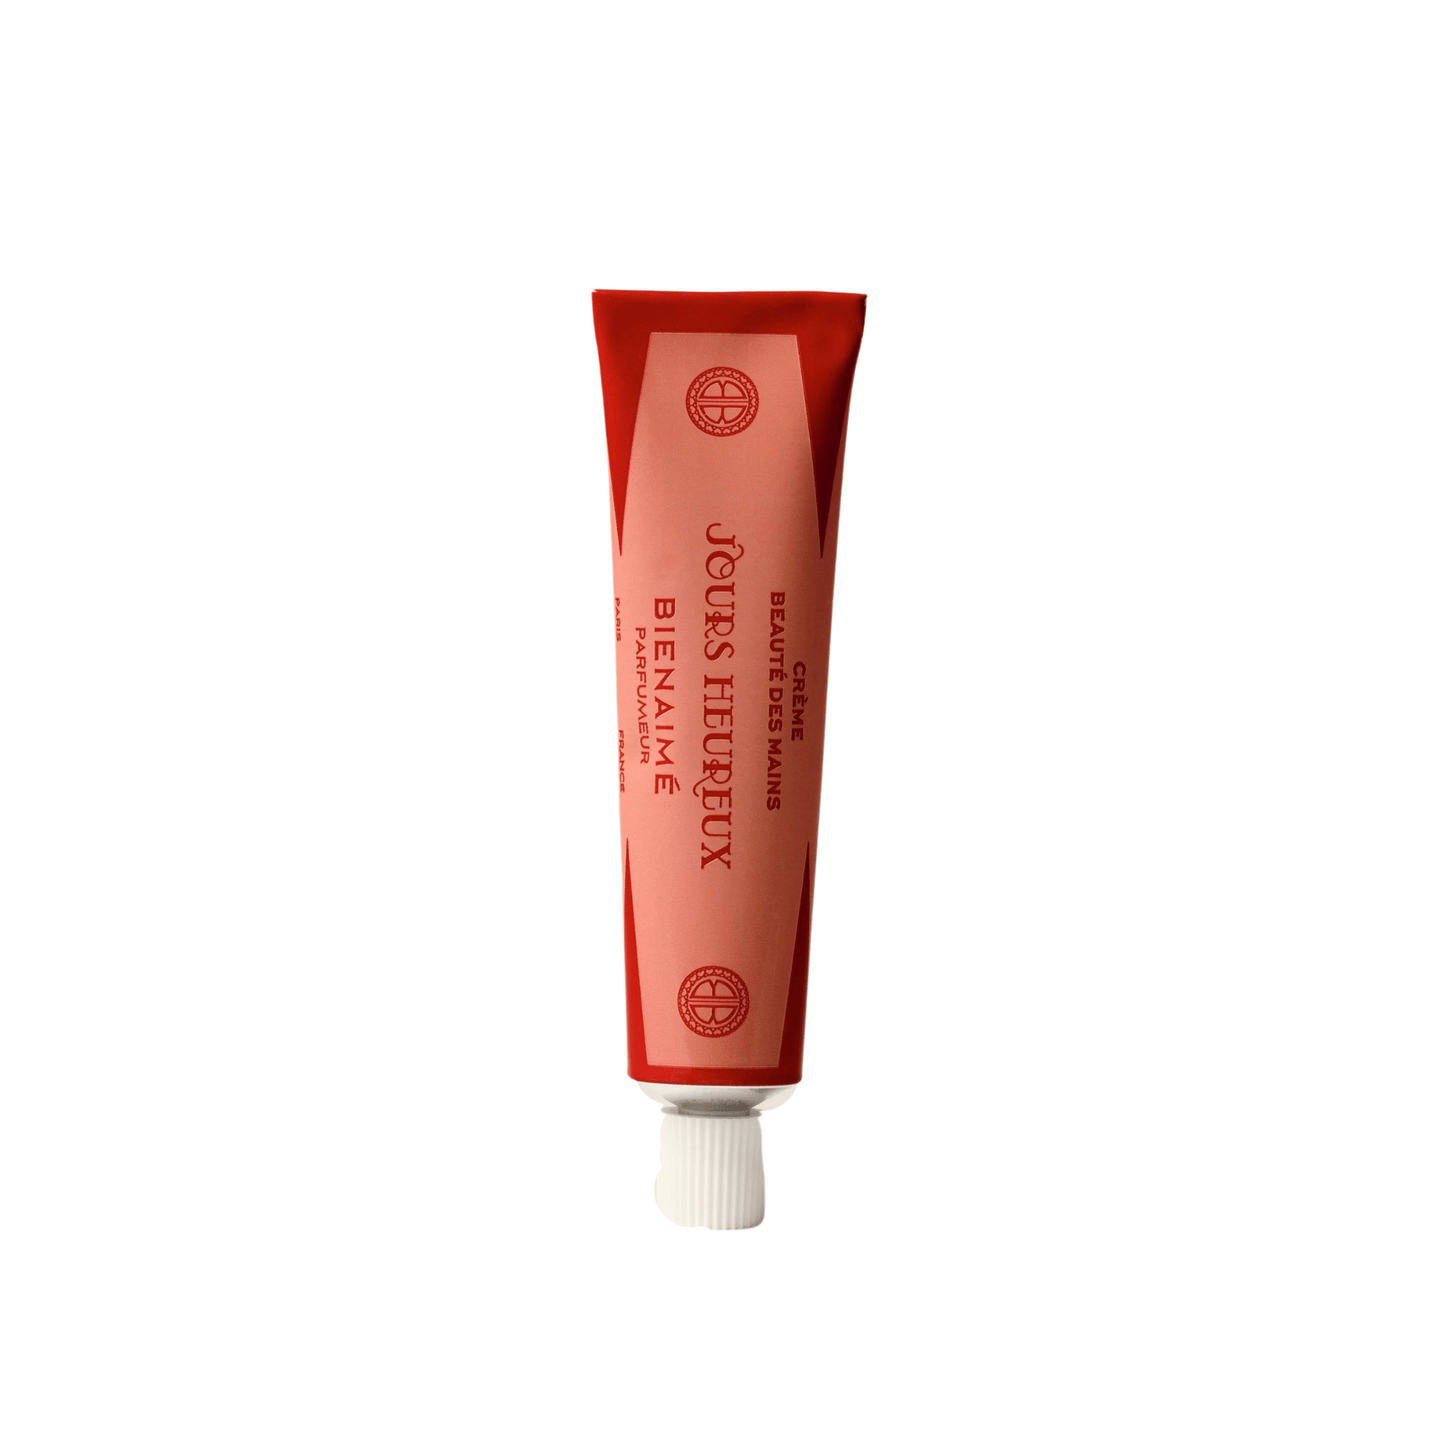 Primary Image of Hand Cream - Jours Heureux